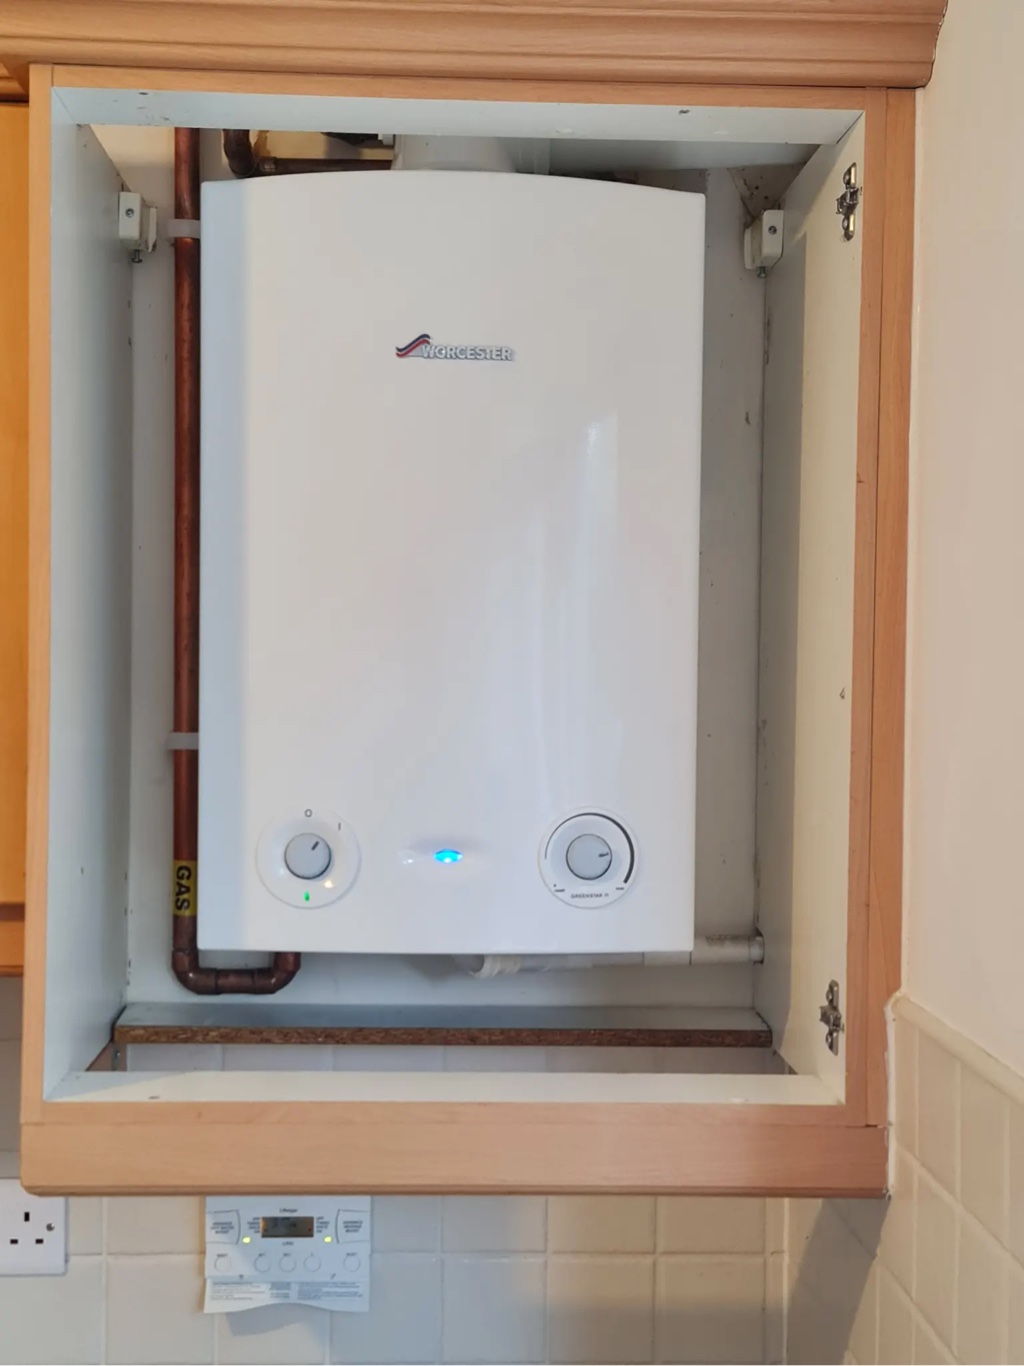 New Worcester boiler installed in wall-mounted cupboard